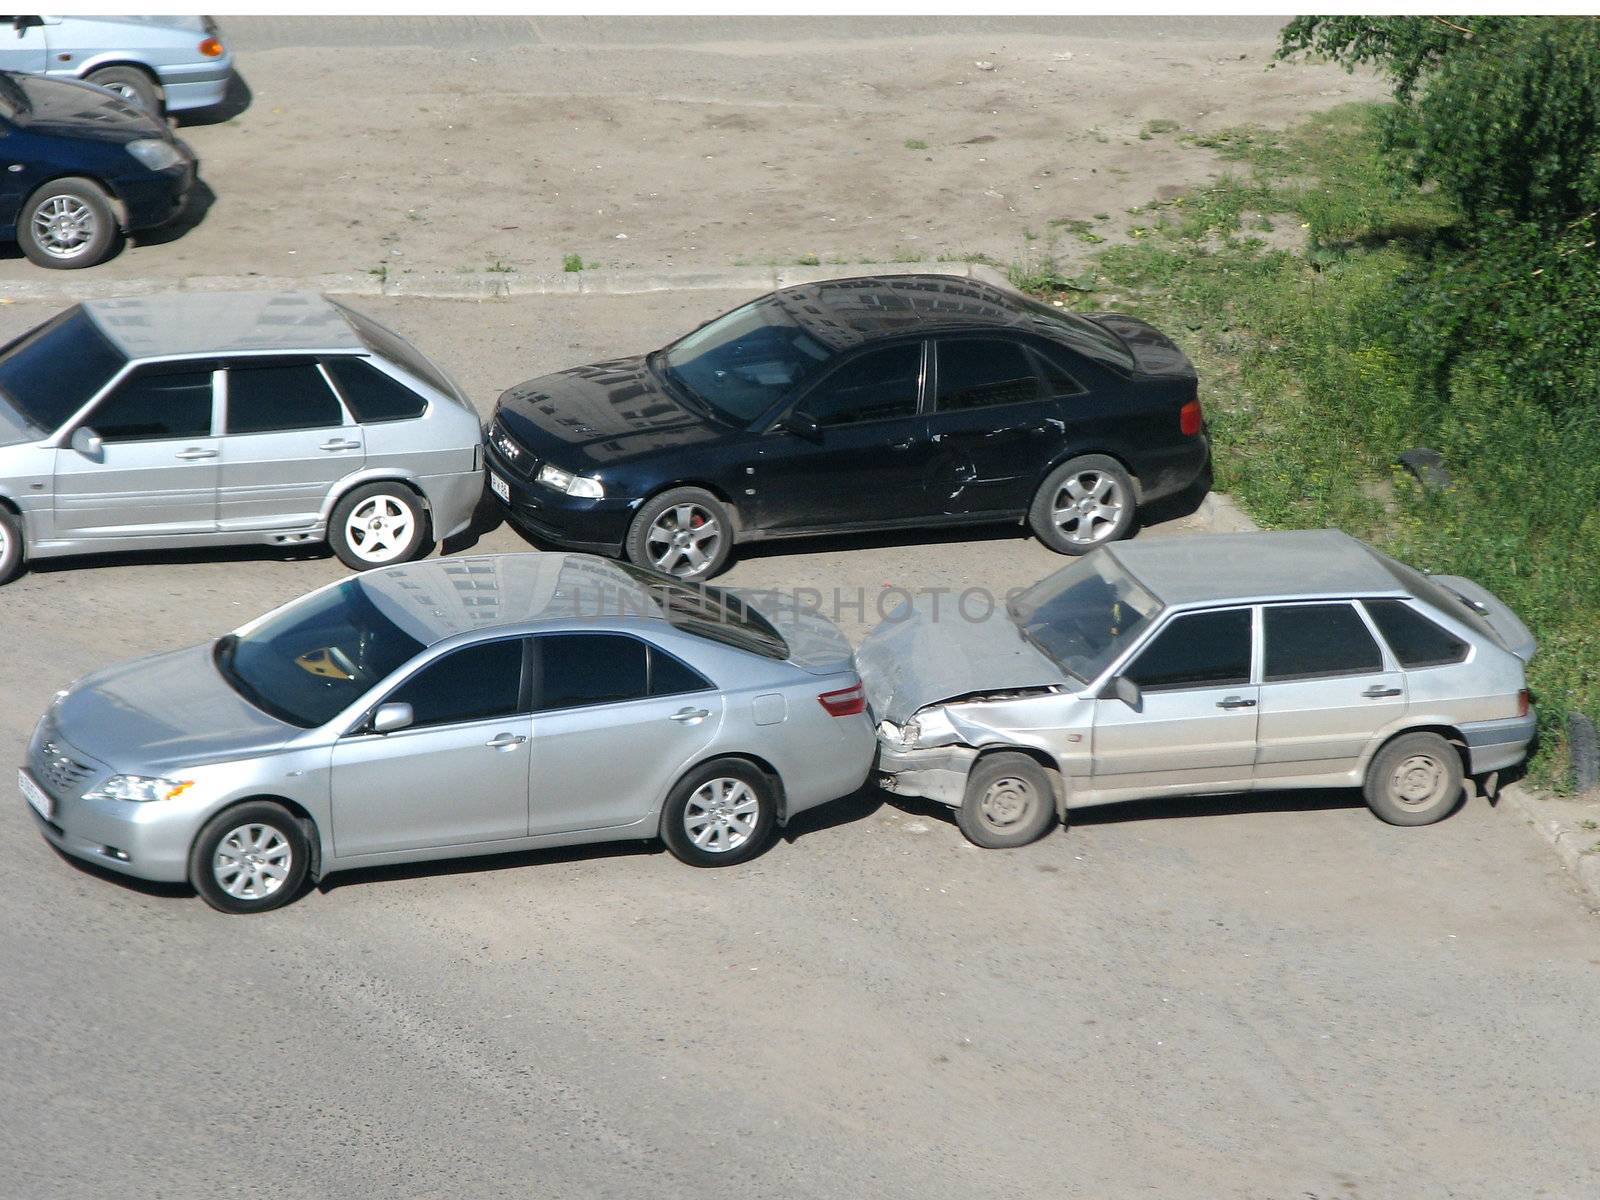 Parking of cars at shortage of a place in a court yard